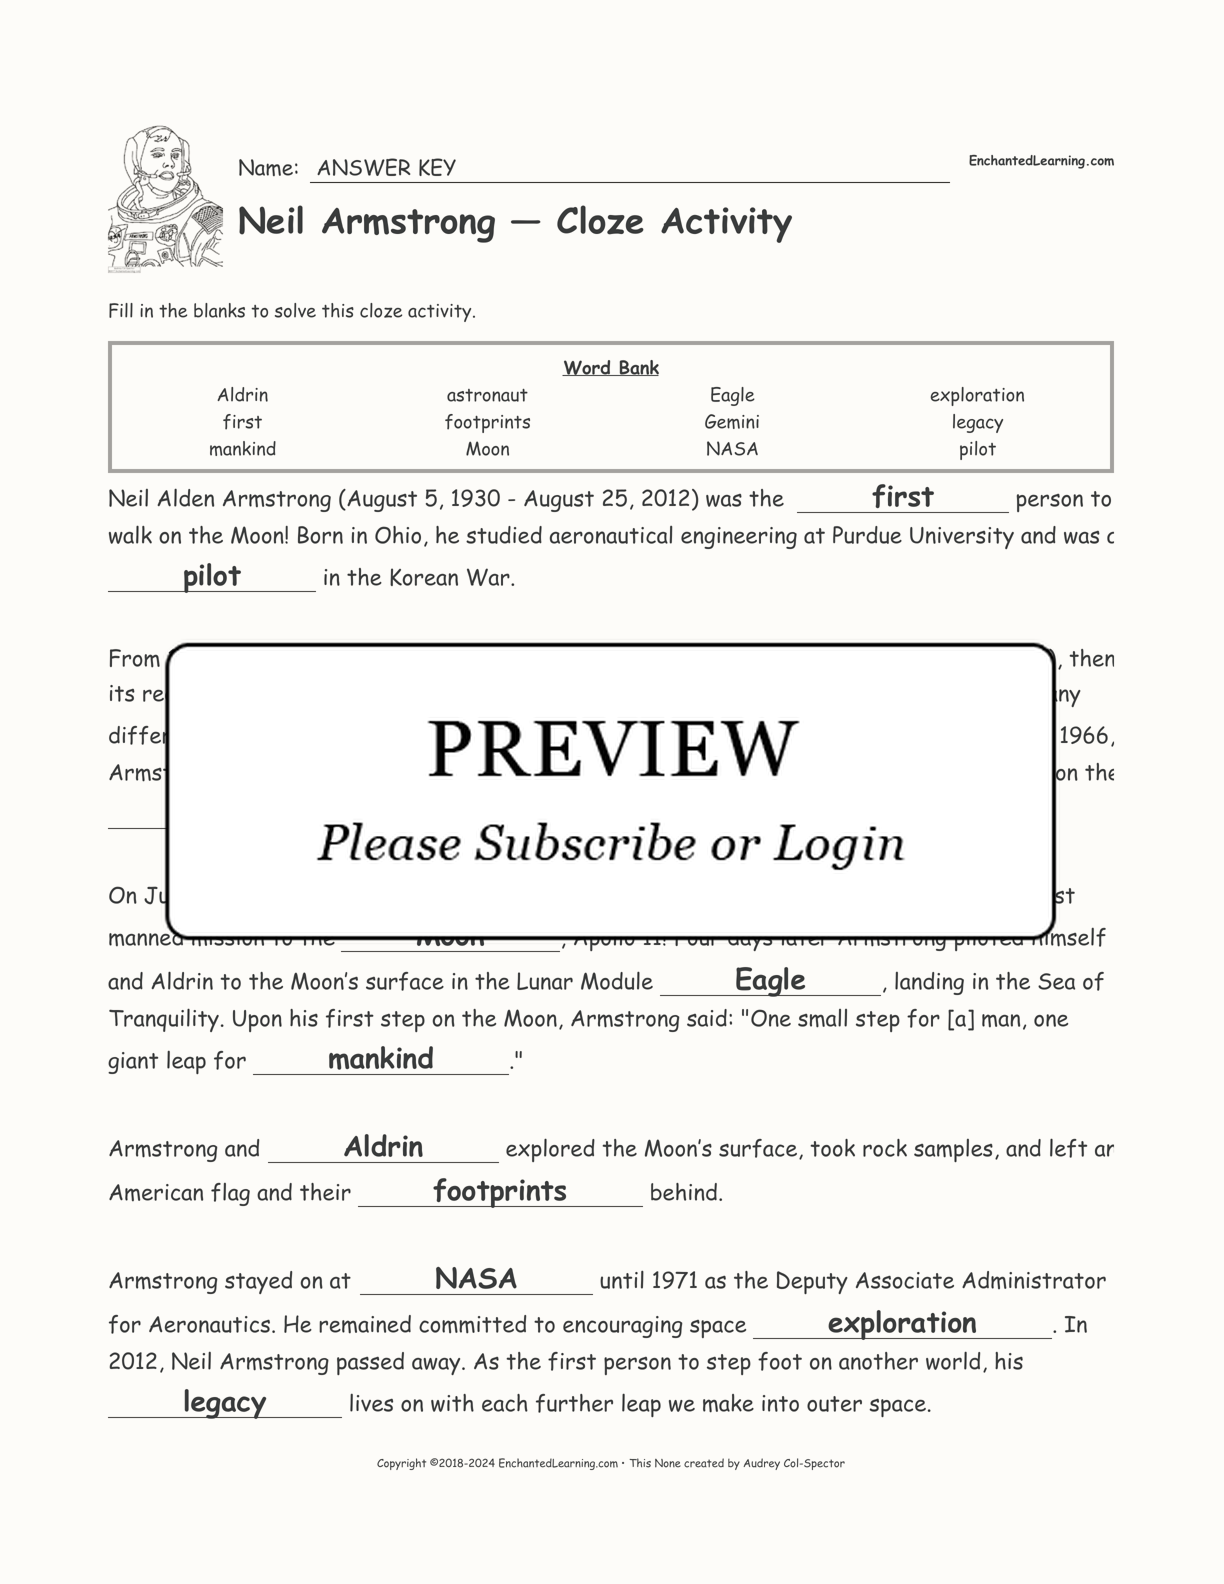 Neil Armstrong — Cloze Activity interactive worksheet page 2